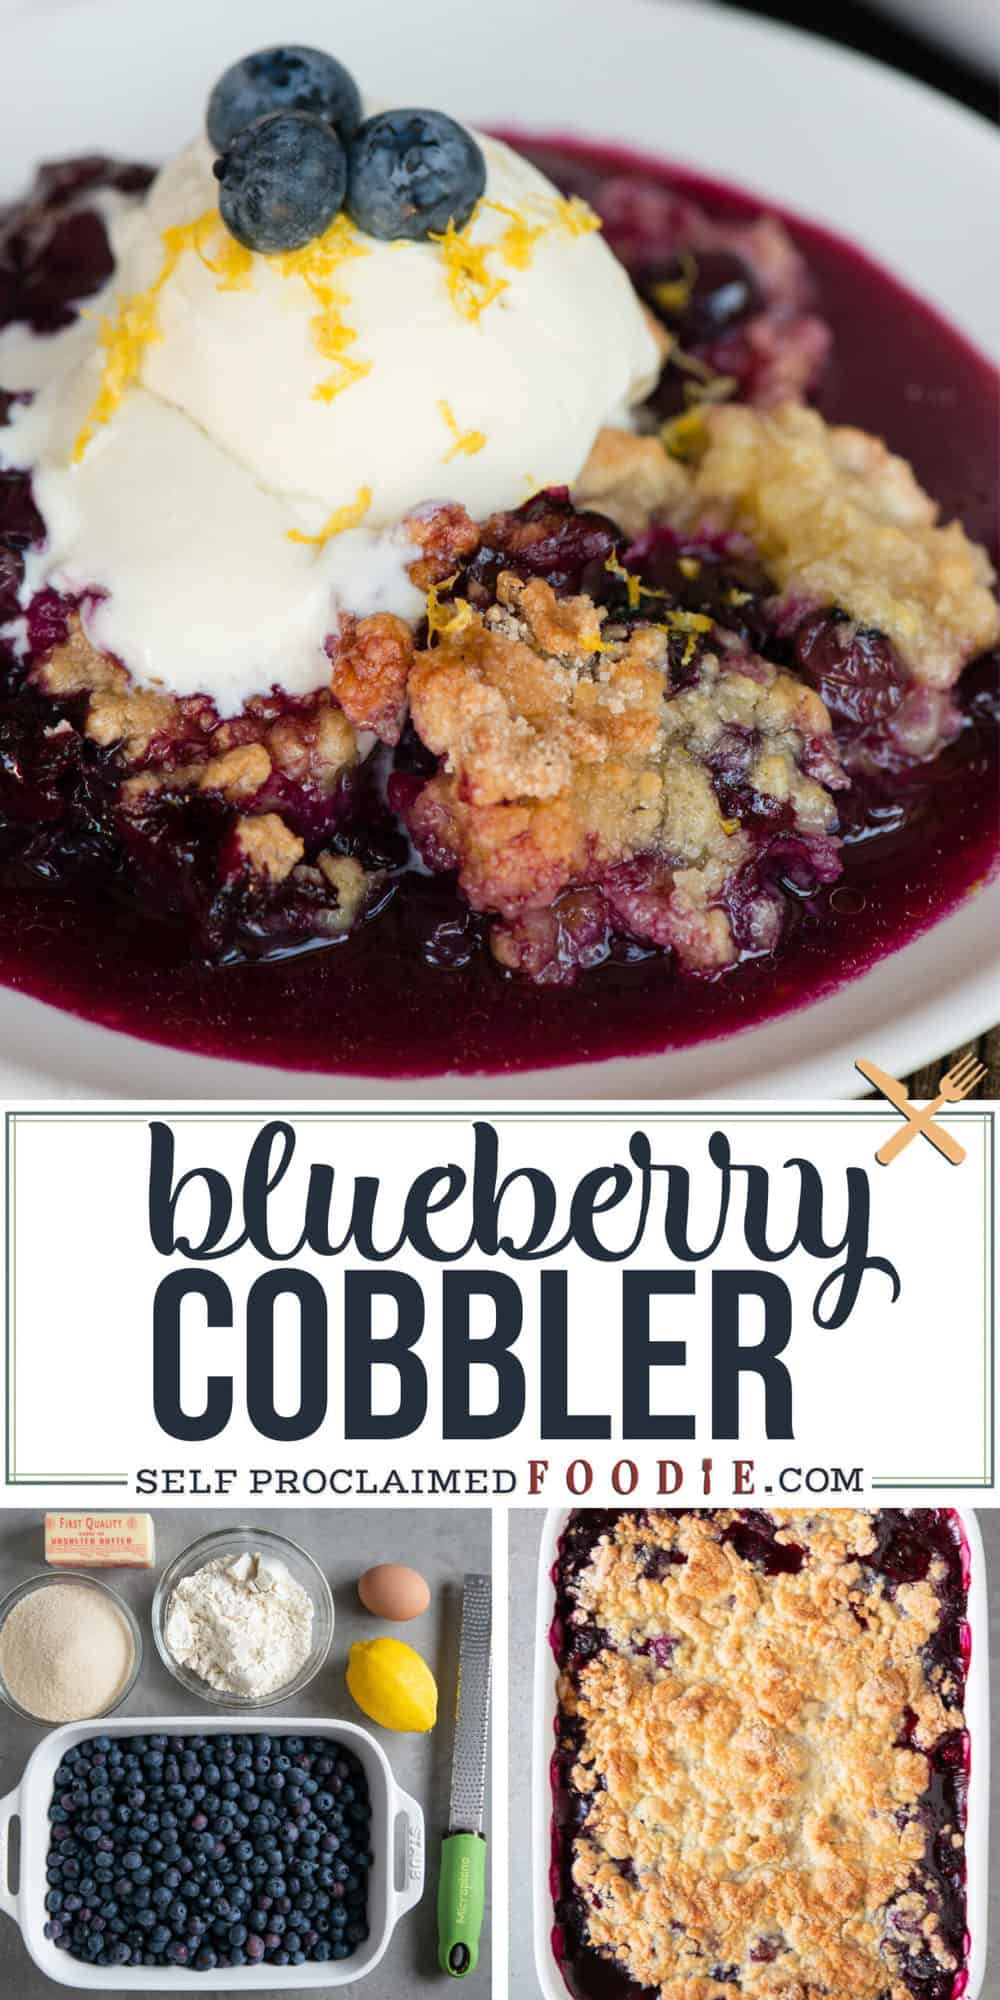 Super Easy Blueberry Cobbler - Self Proclaimed Foodie